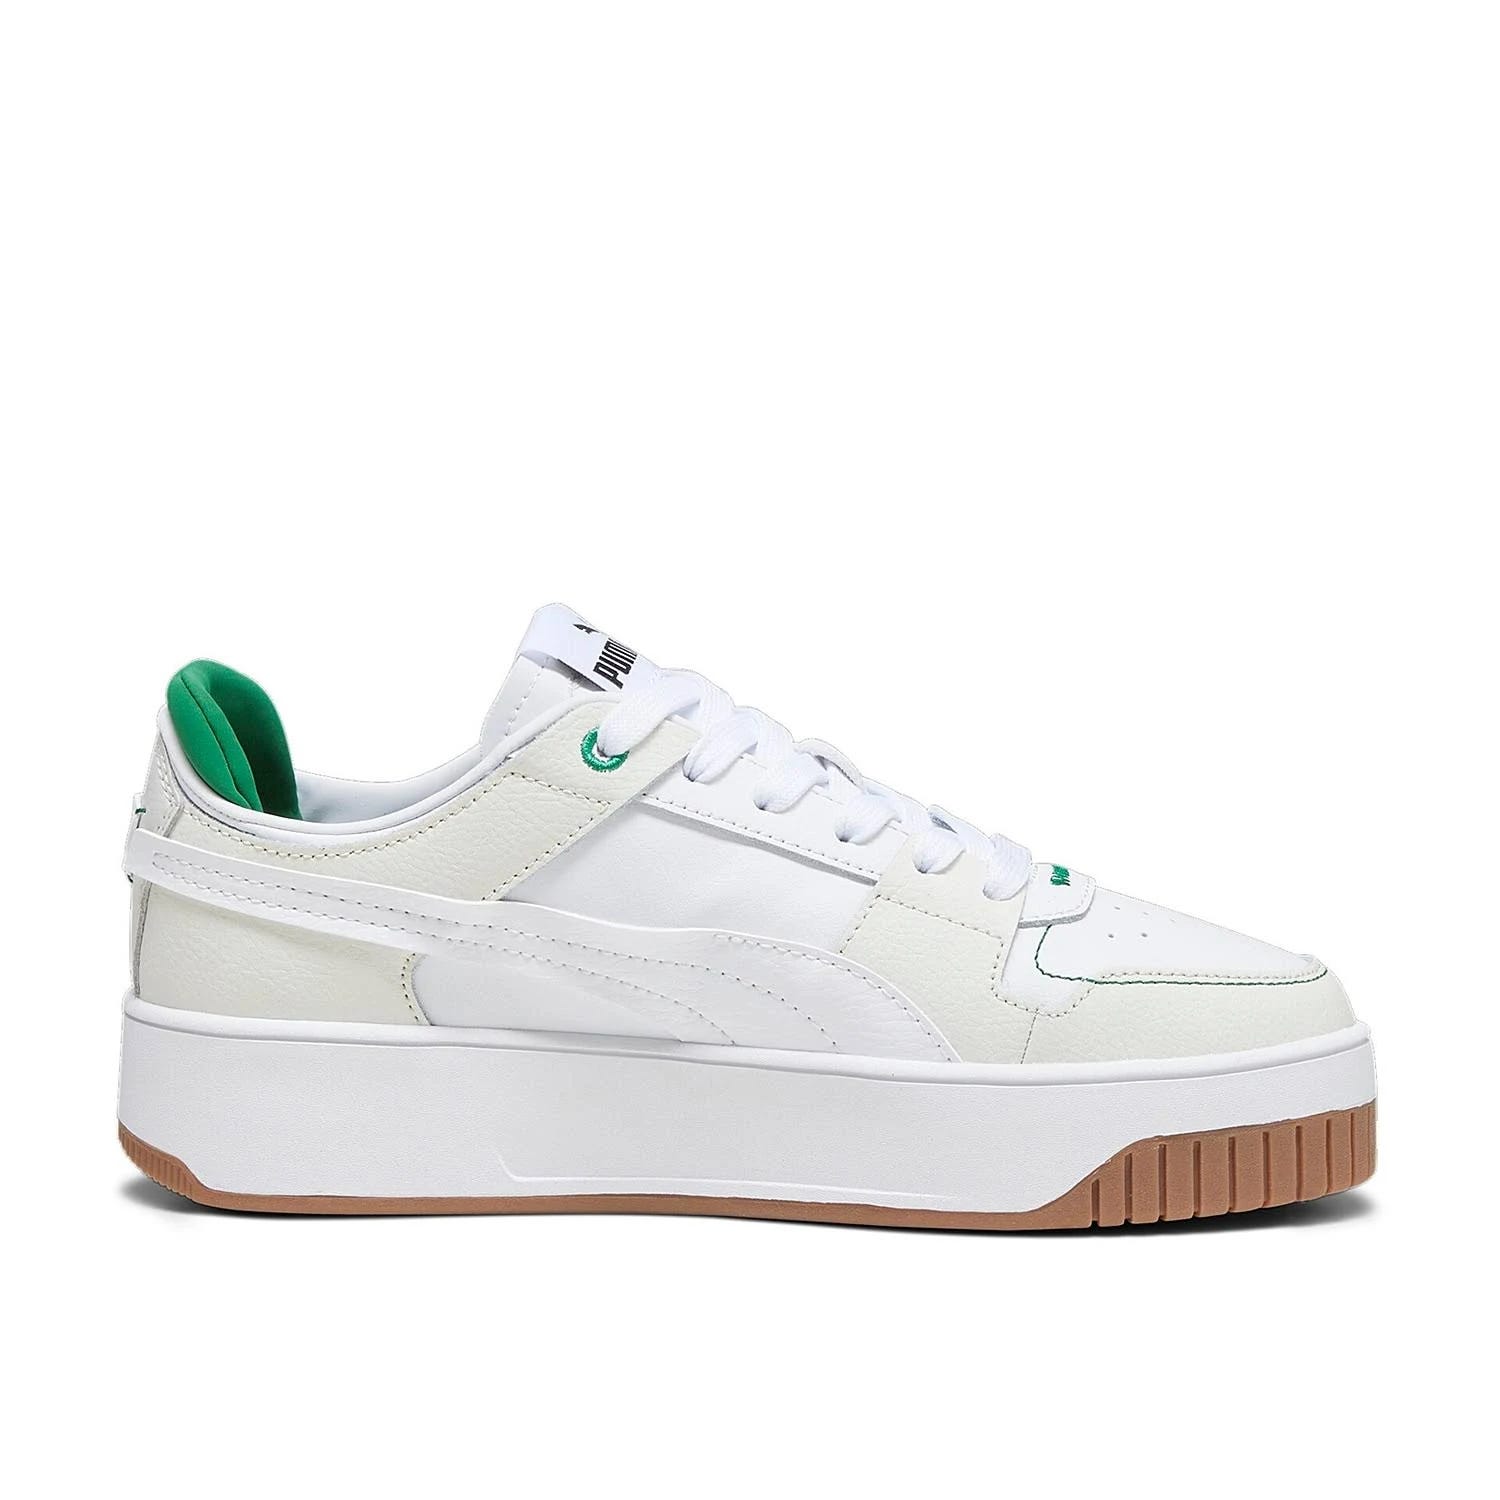 Puma Carina Street Vintage Sneakers for Women: Classic Style in White (Size 10) | Image